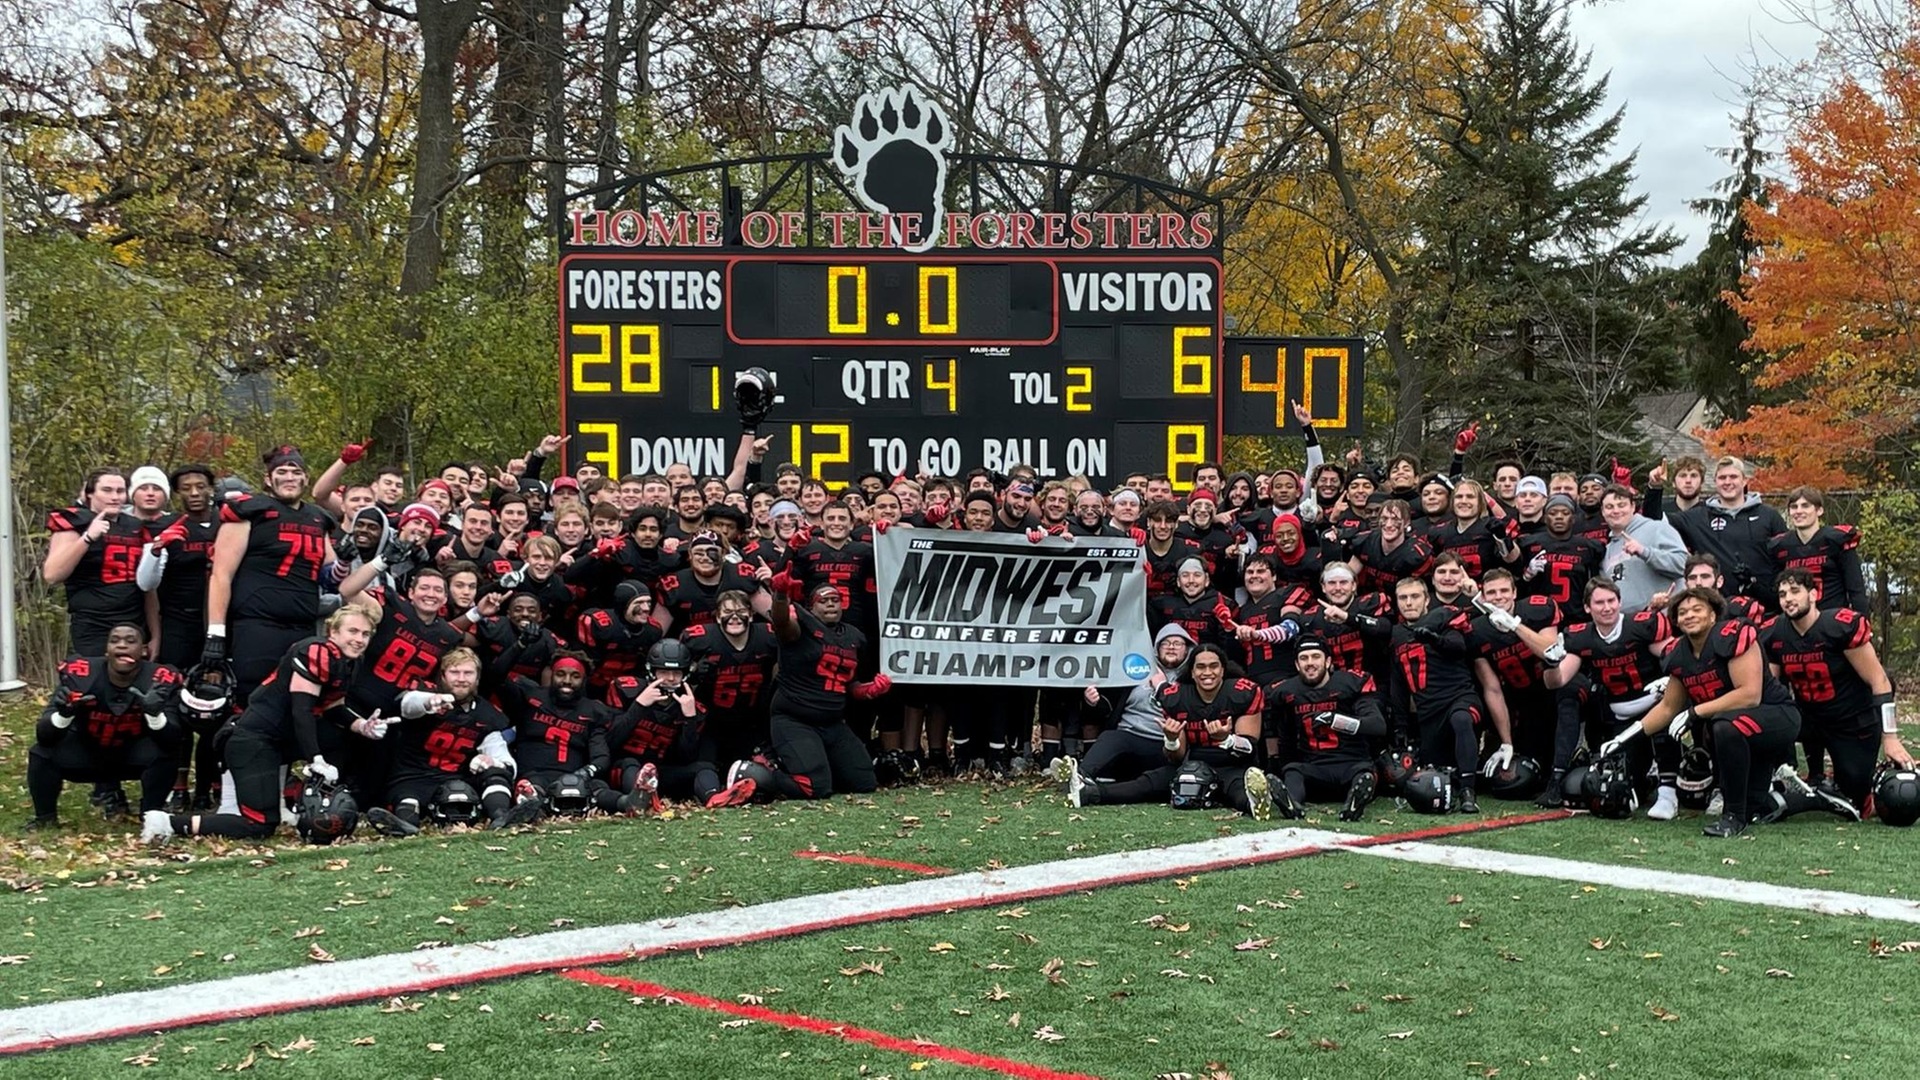 MWC Champion Foresters Defeat Chicago, Complete Perfect Regular Season